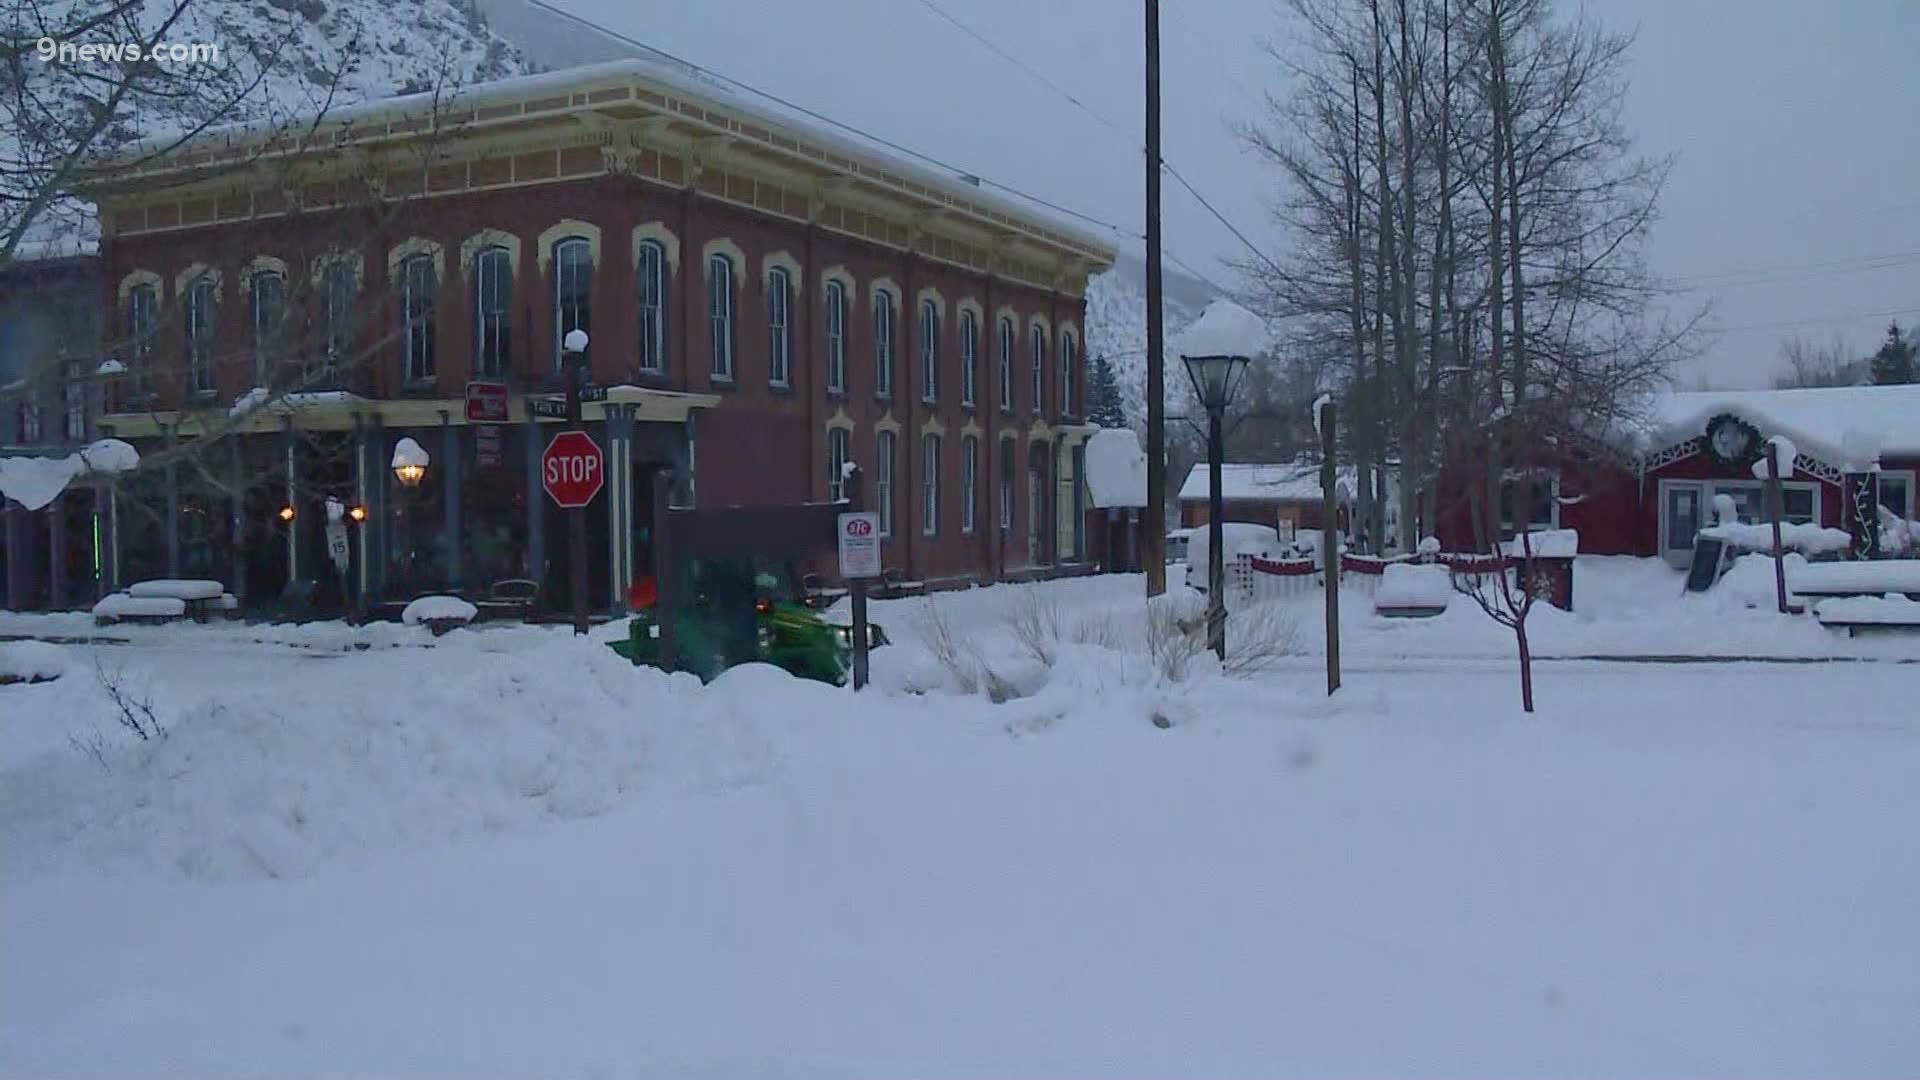 Matt Renoux is in Georgetown, where plowing is underway after the town got about 2 feet of snow.